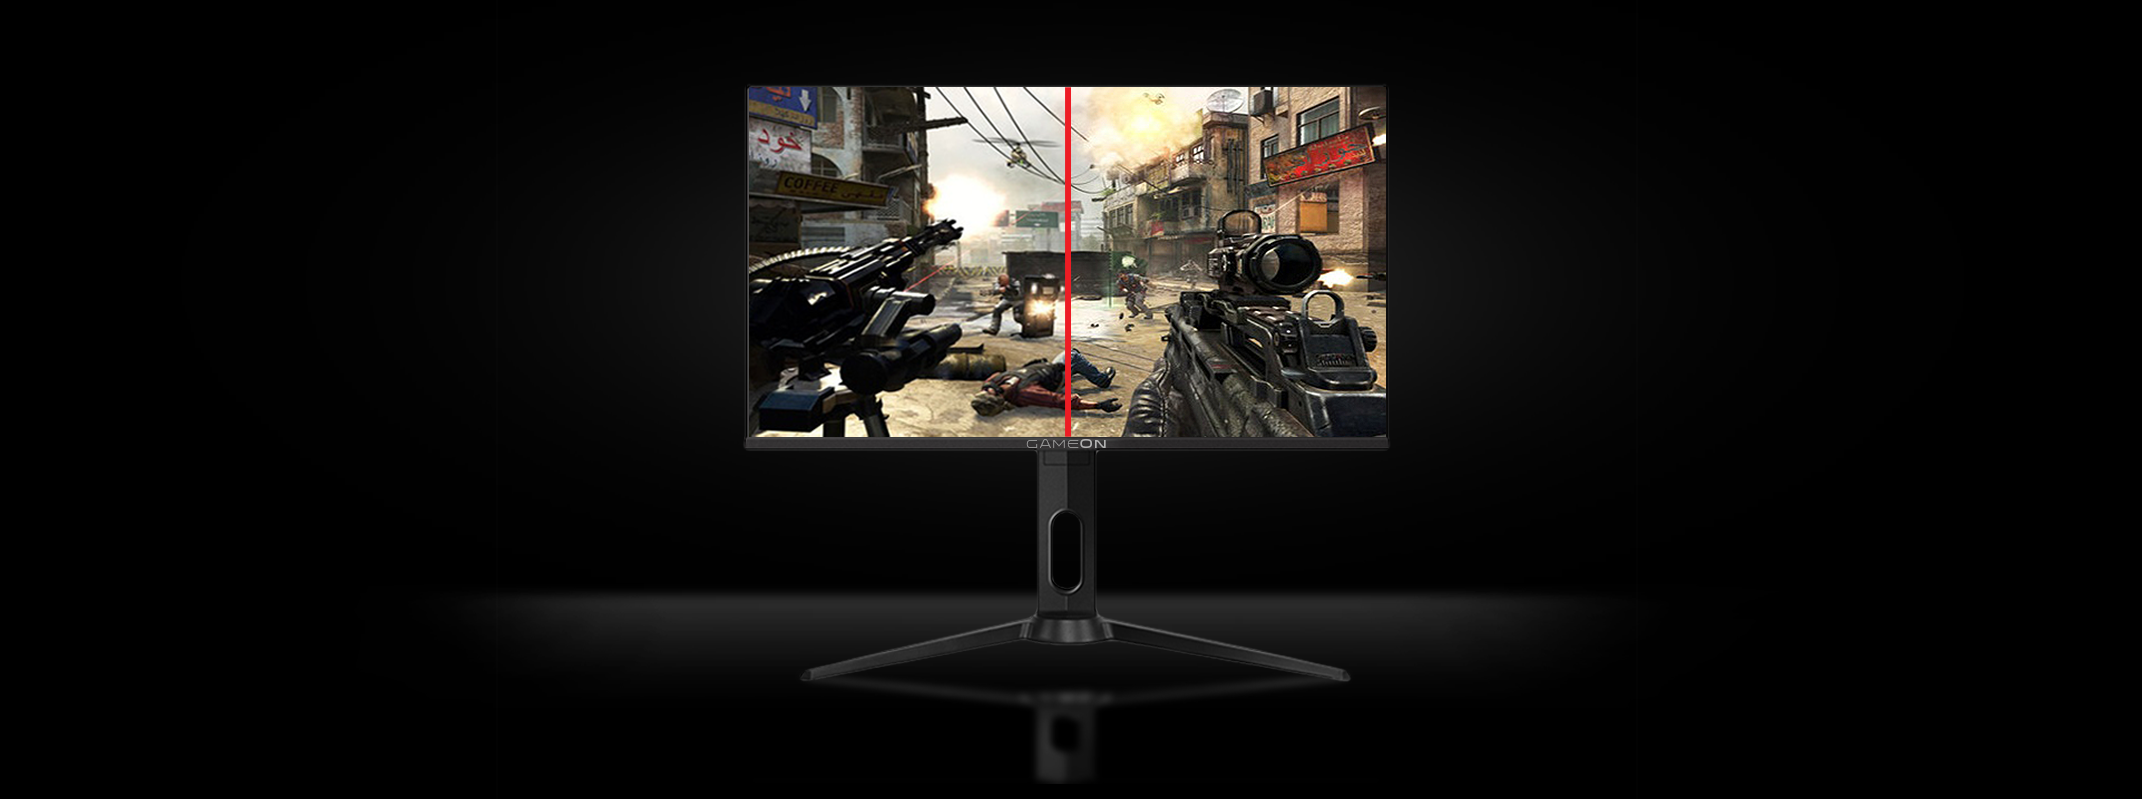 GAMEON GO-FHD27IPS165 27" FHD, 165Hz, IPS Gaming Monitor With G-Sync & Free Sync